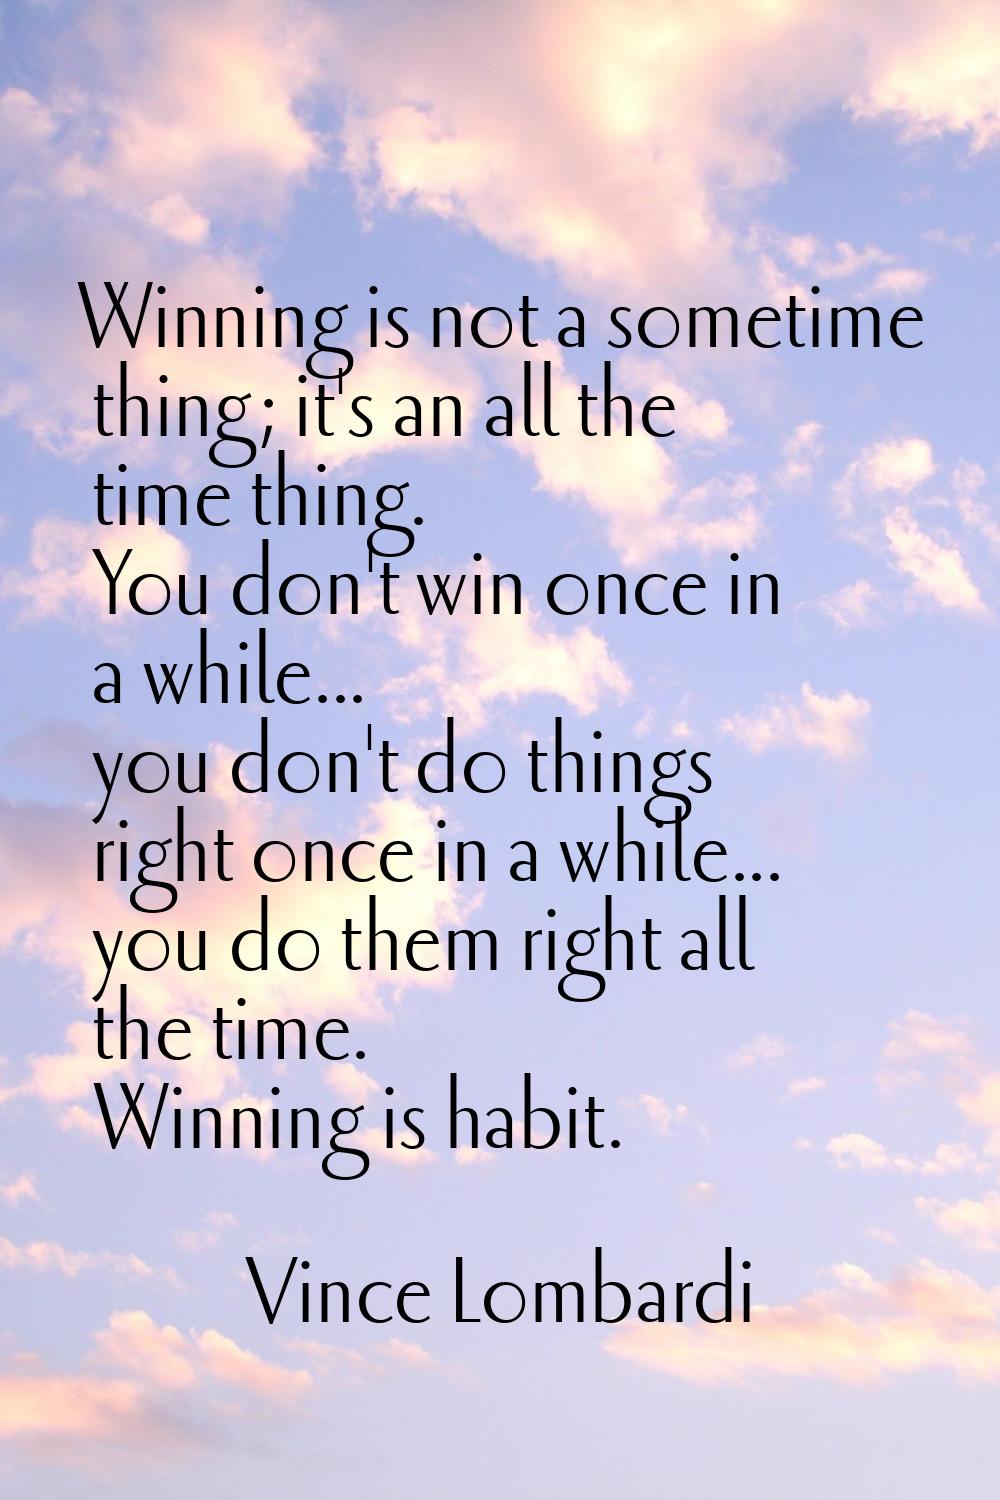 Winning is not a sometime thing; it's an all the time thing. You don't win once in a while... you d